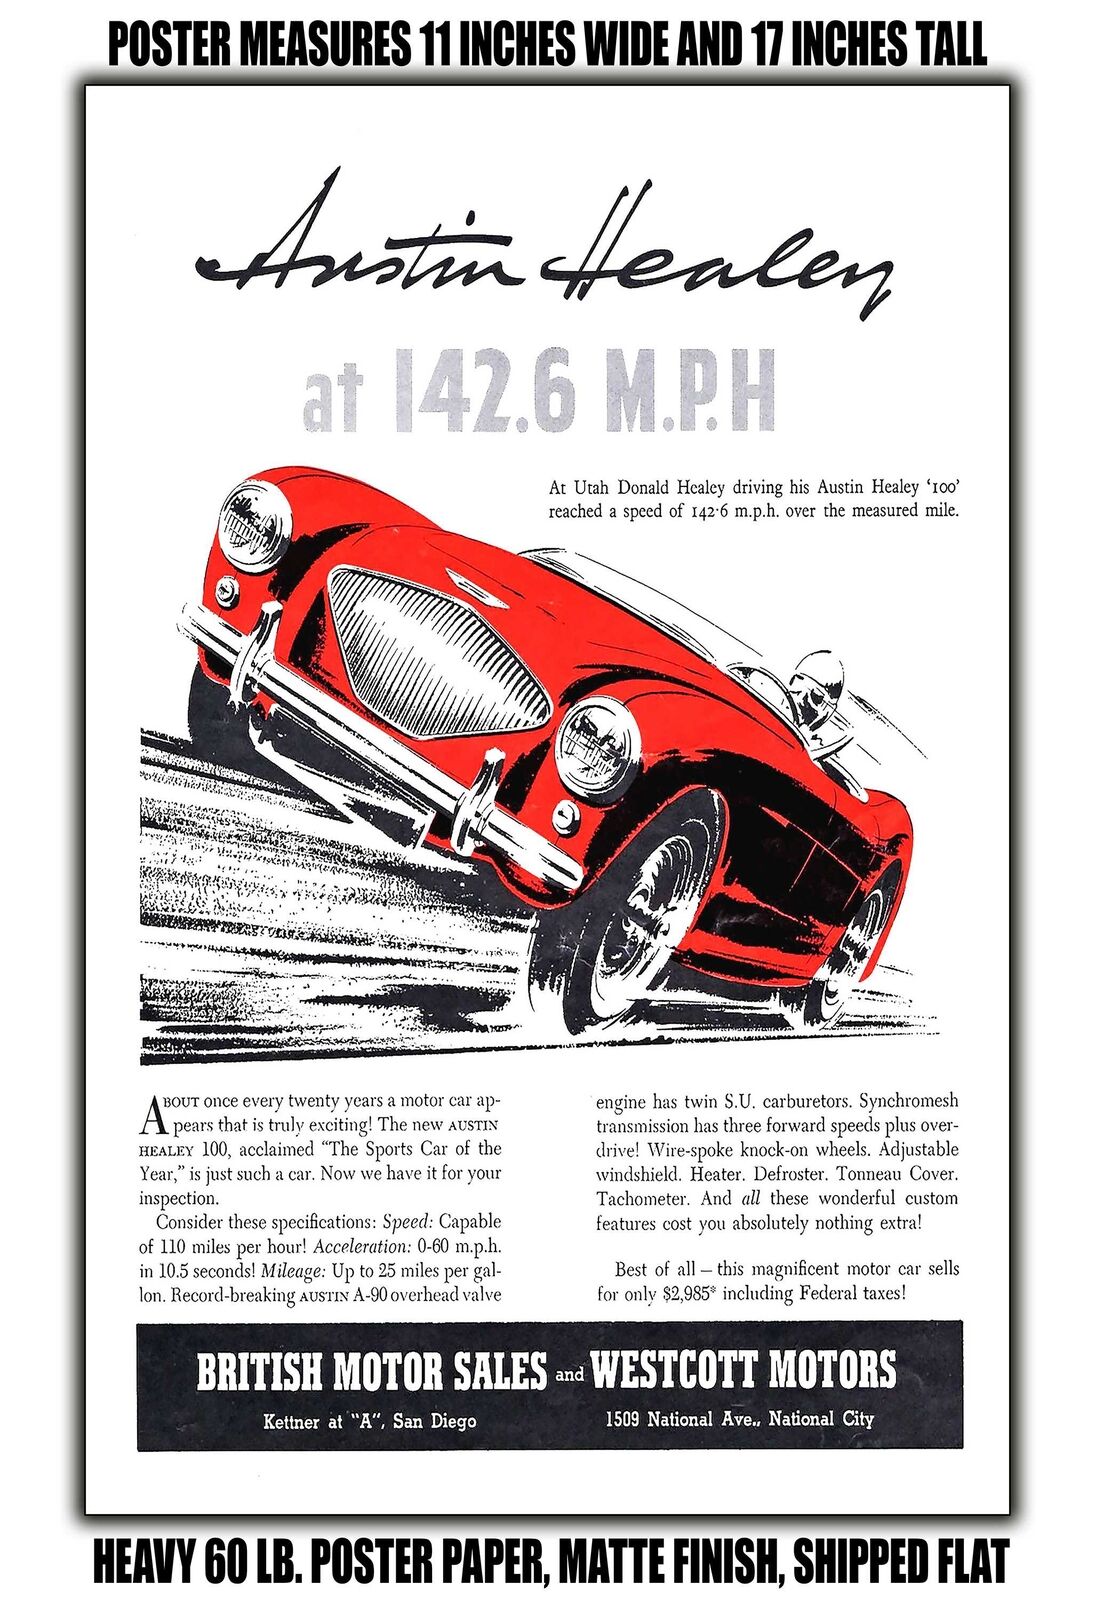 11x17 POSTER - 1954 Austin Healey 100 Driving by Donal Healey at Utah